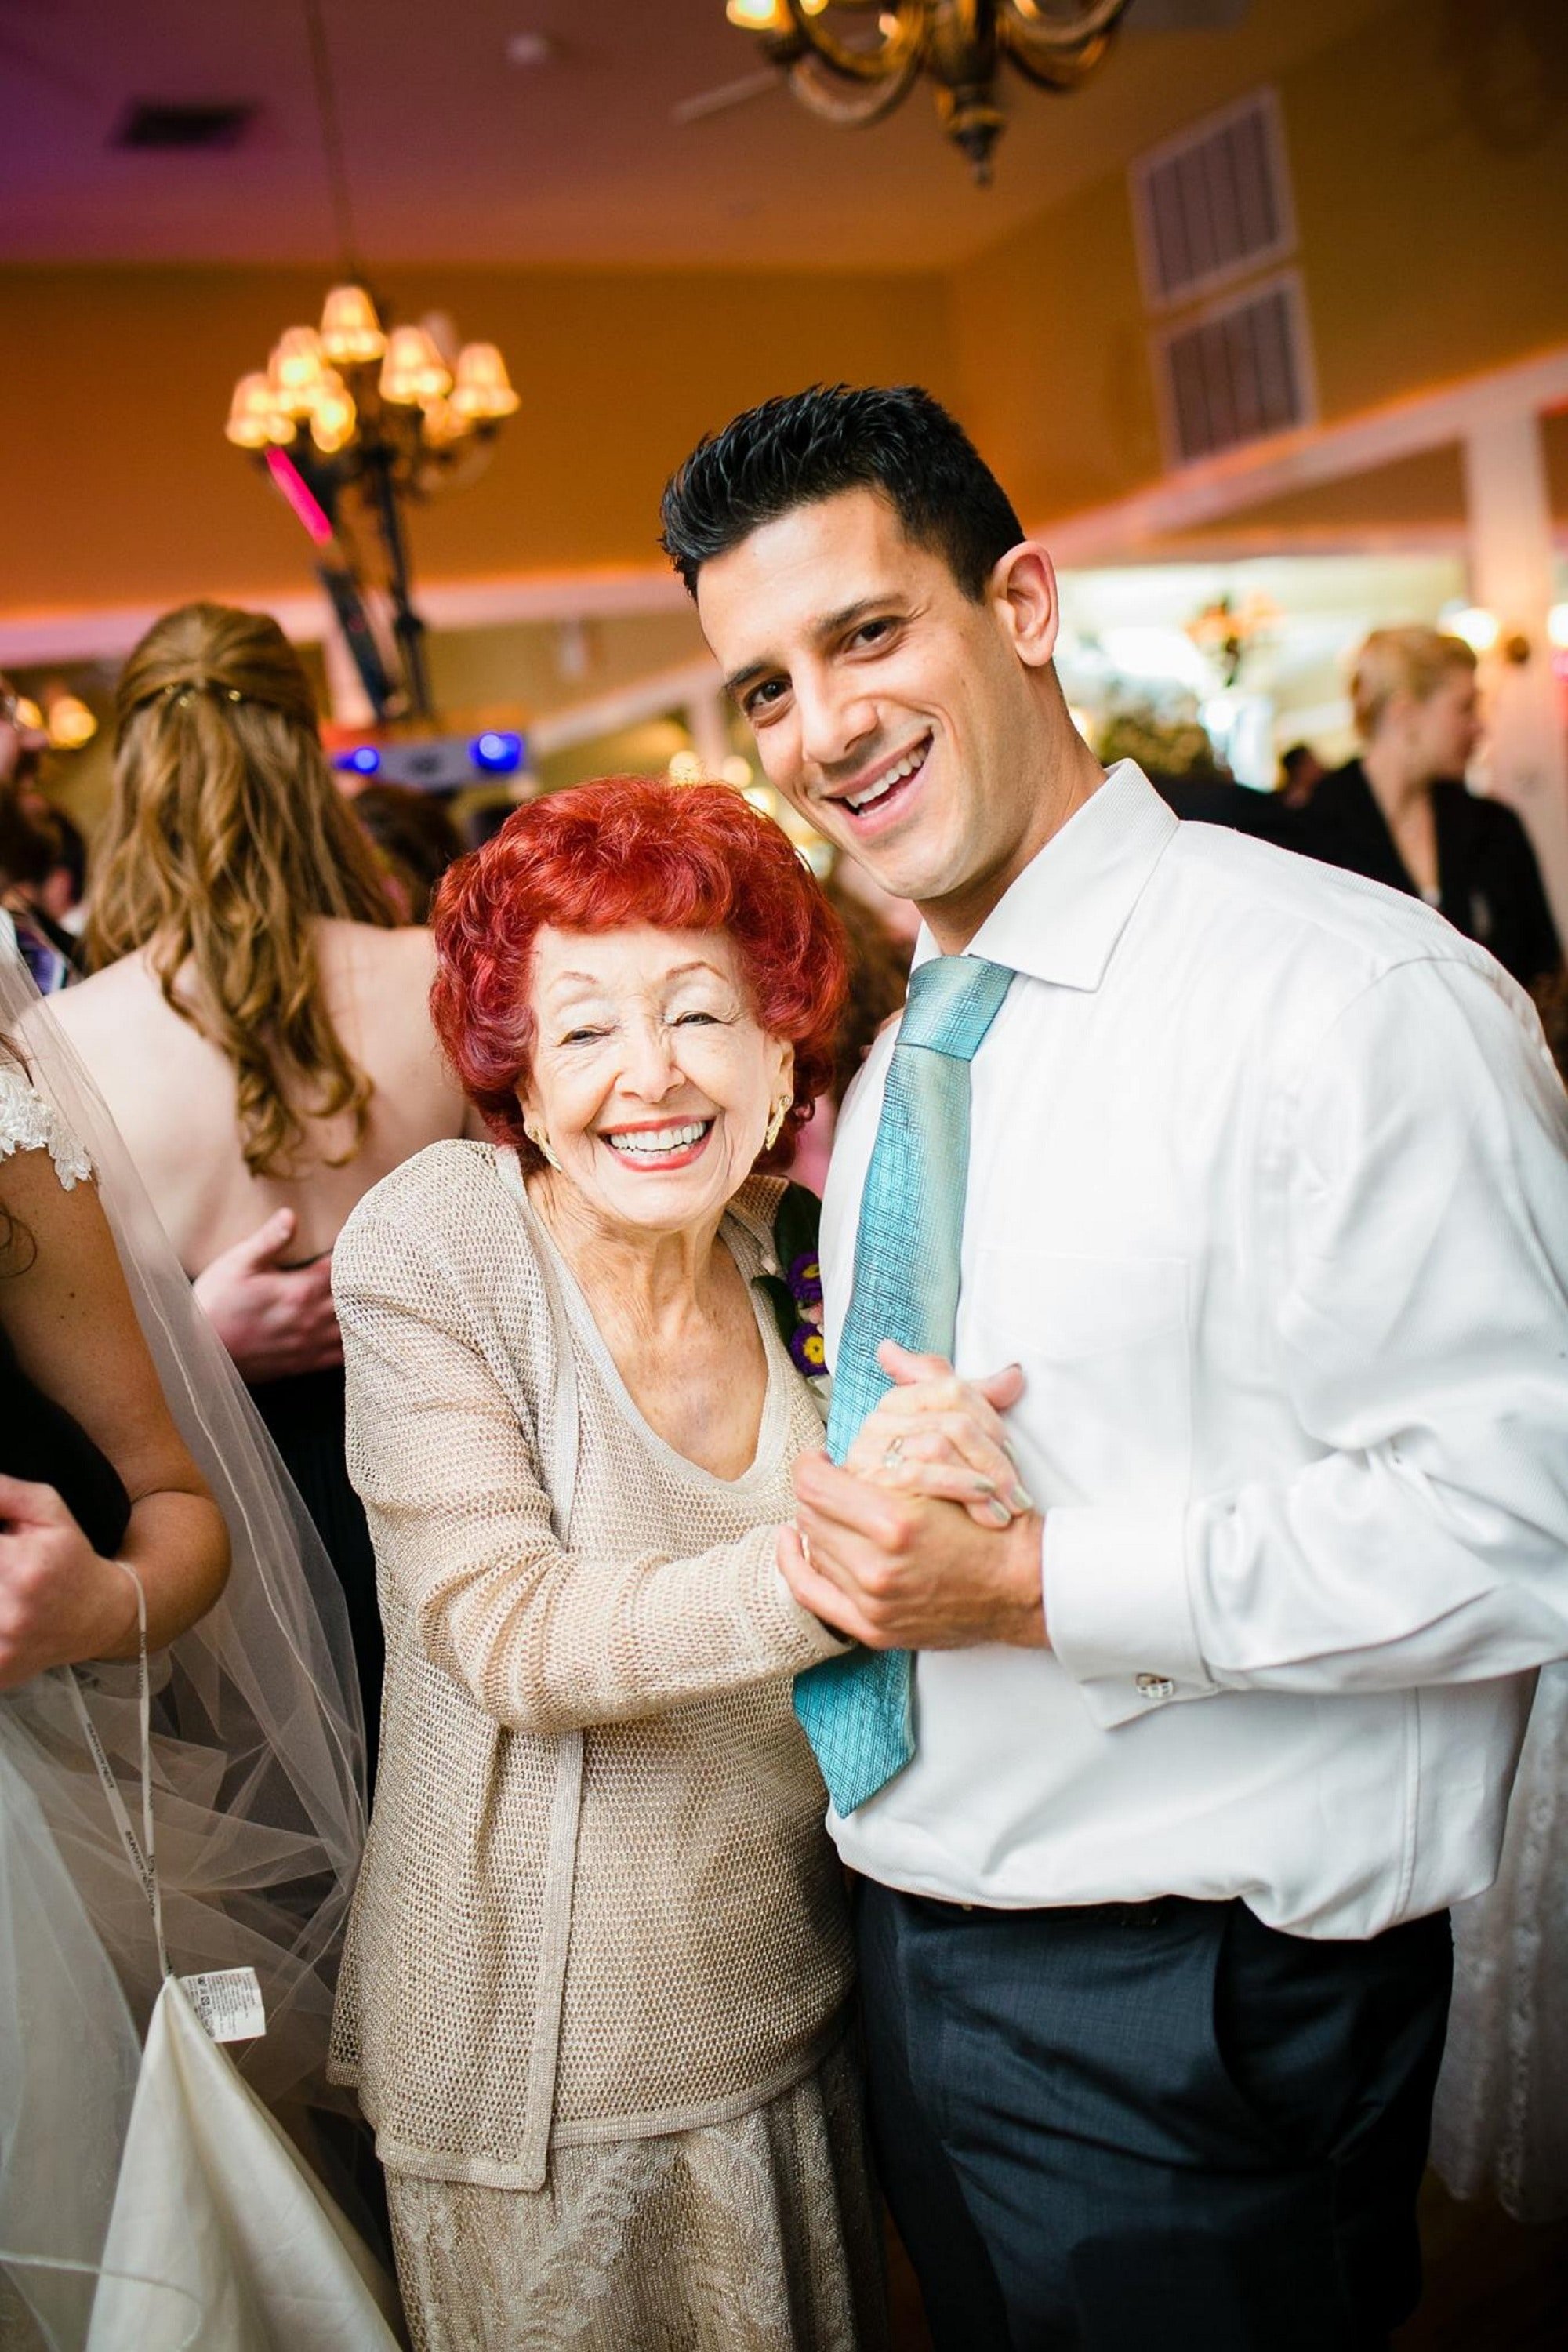 A young man and his grandmother dancing. | Source: Unsplash